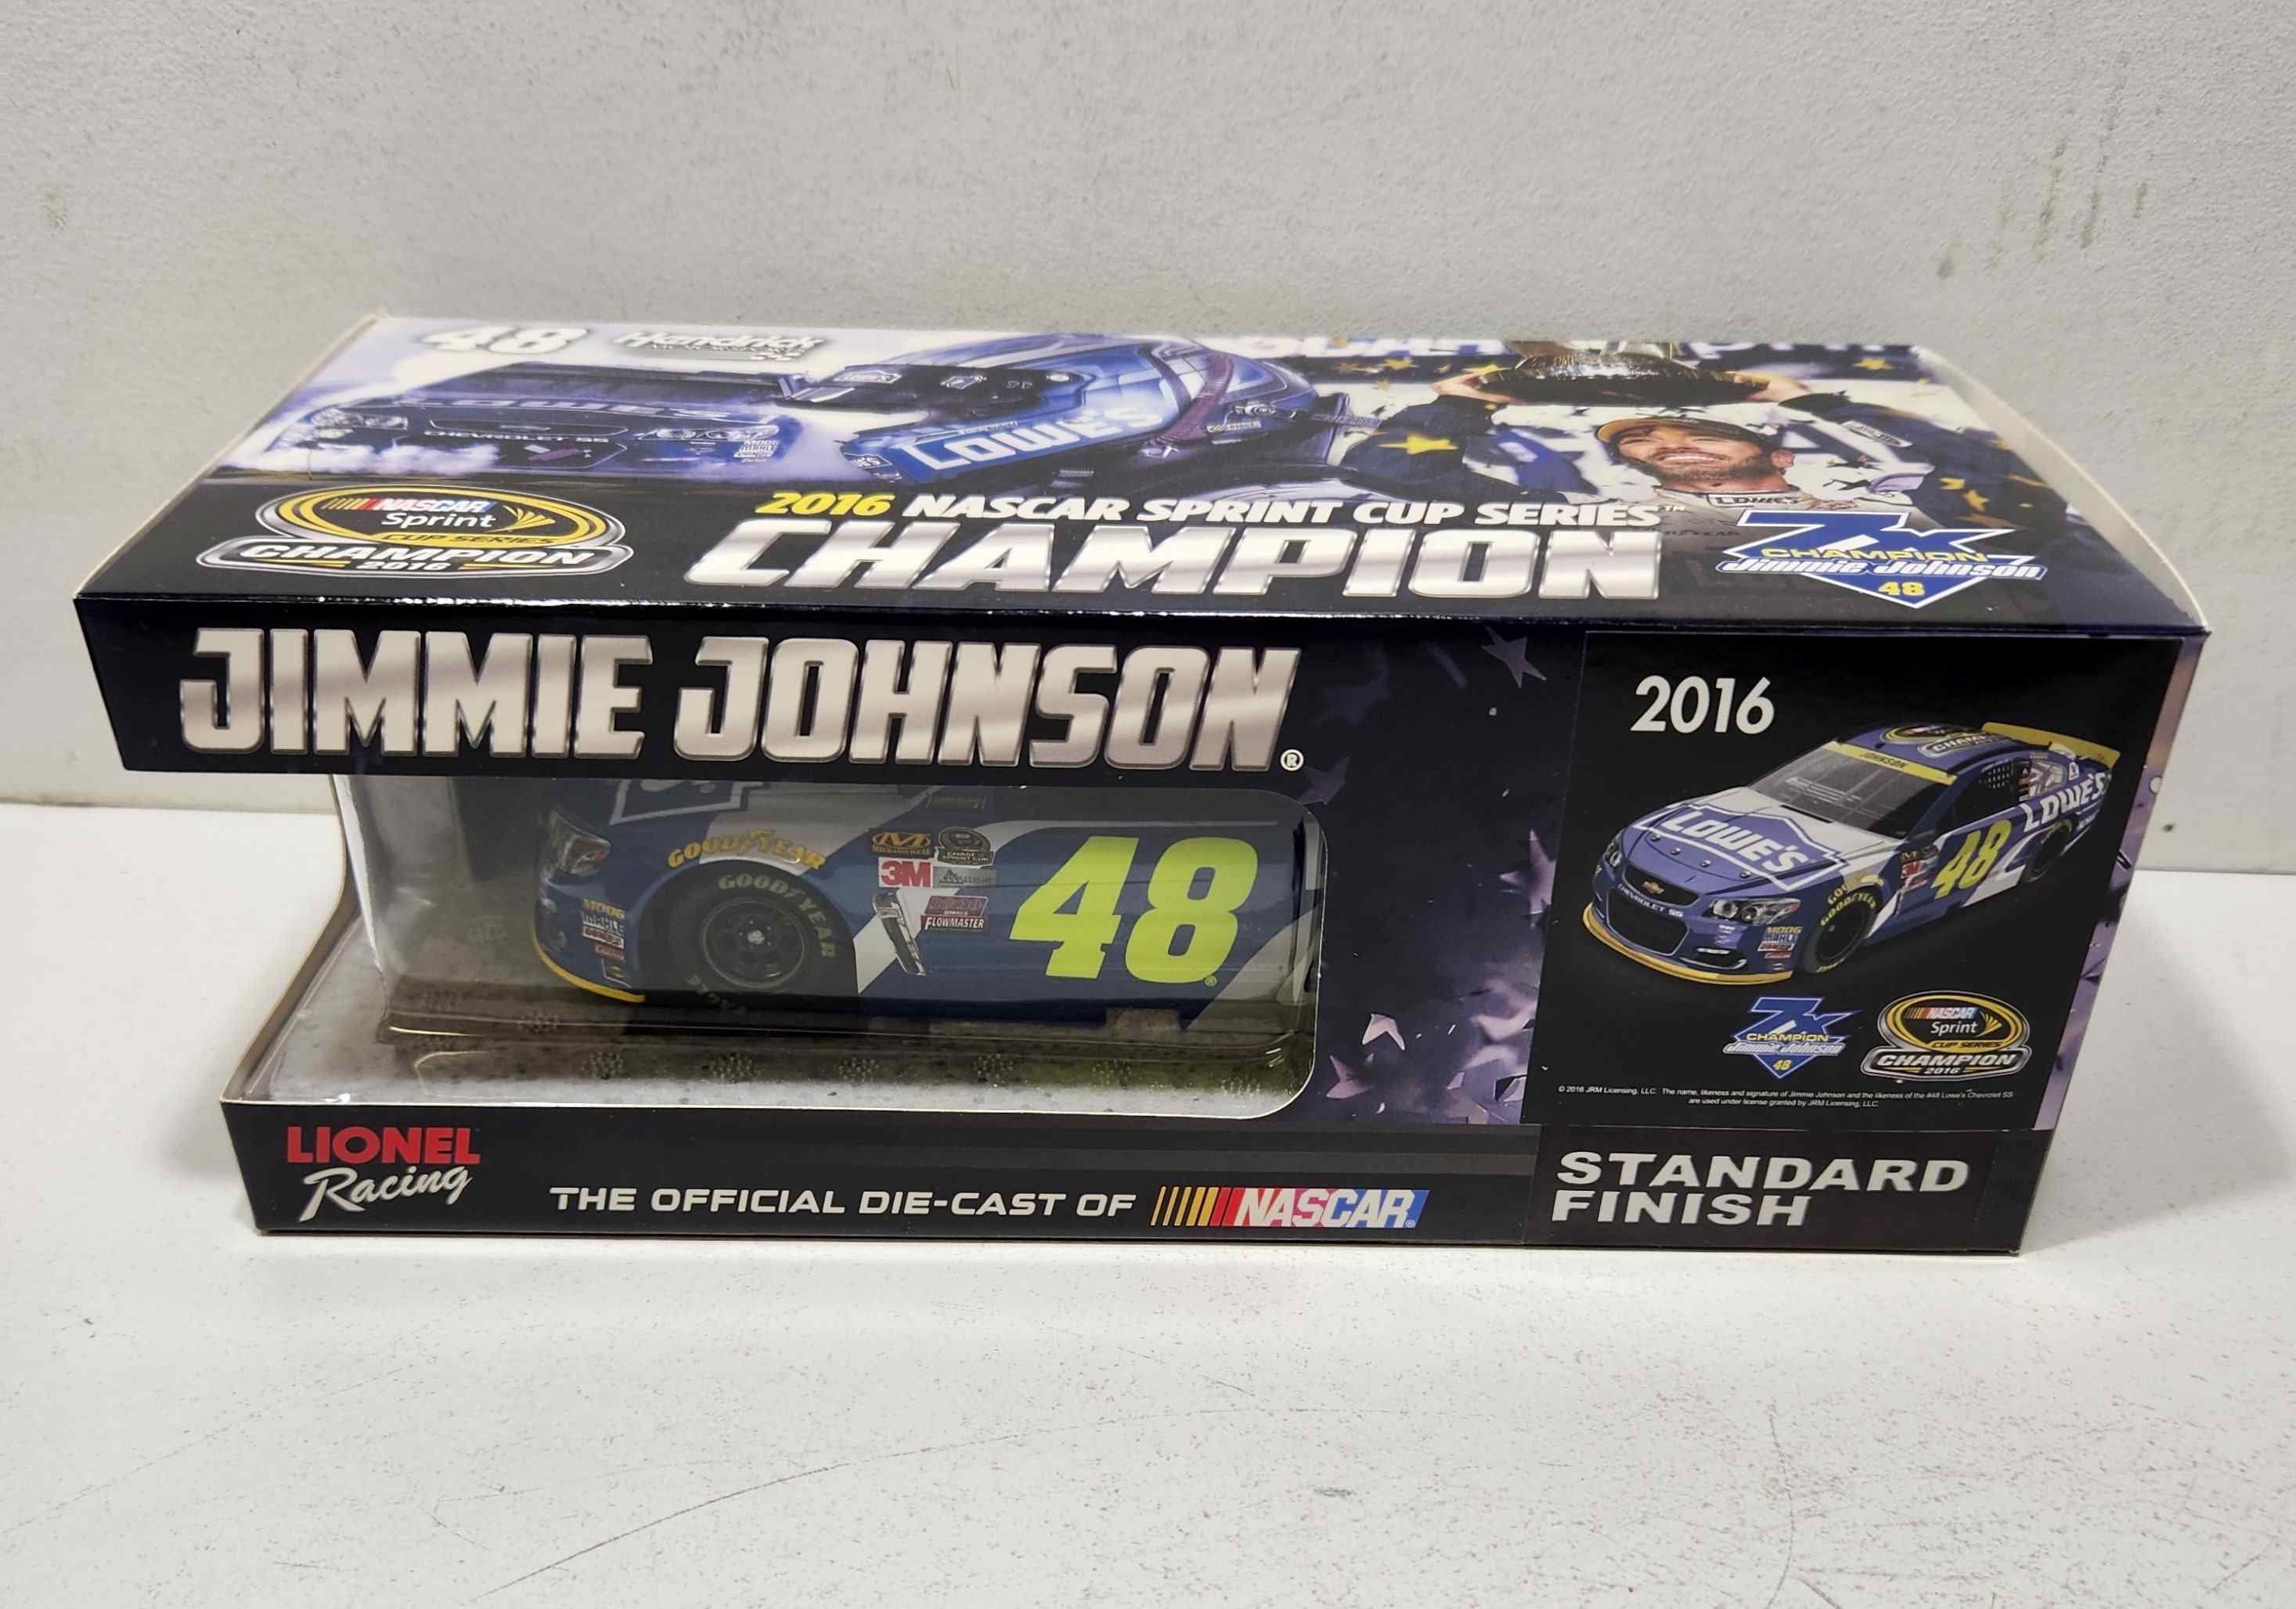 2016 Jimmy Johnson 1/24th Lowe's "7 Time Champion" Chevrolet SS